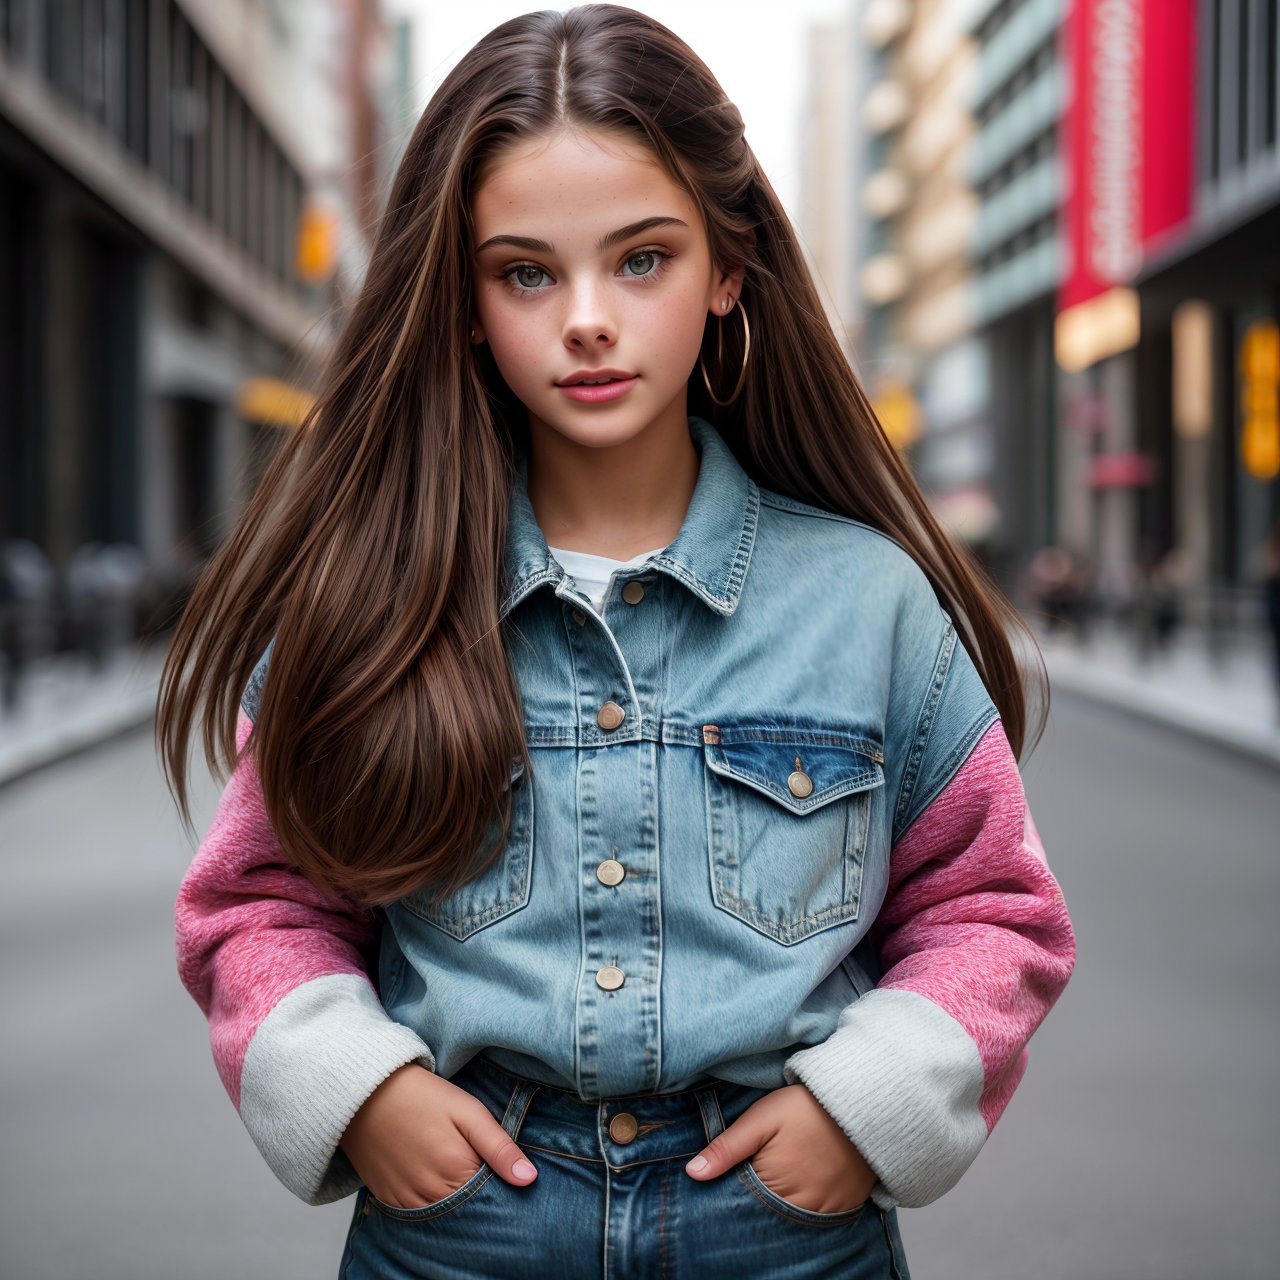 extra resolution, looking back, portrait of stunning (AIDA_LoRA_MeW2016:1.12) <lora:AIDA_LoRA_MeW2016:0.86> as little girl wearing a sherpa jacket and jeans on the street, outdoors, pretty face, naughty, funny, happy, playful, intimate, flirting with camera, cinematic, insane level of details, studio photo, studio photo, kkw-ph1, hdr, f1.8 , getty images, (colorful:1.1)